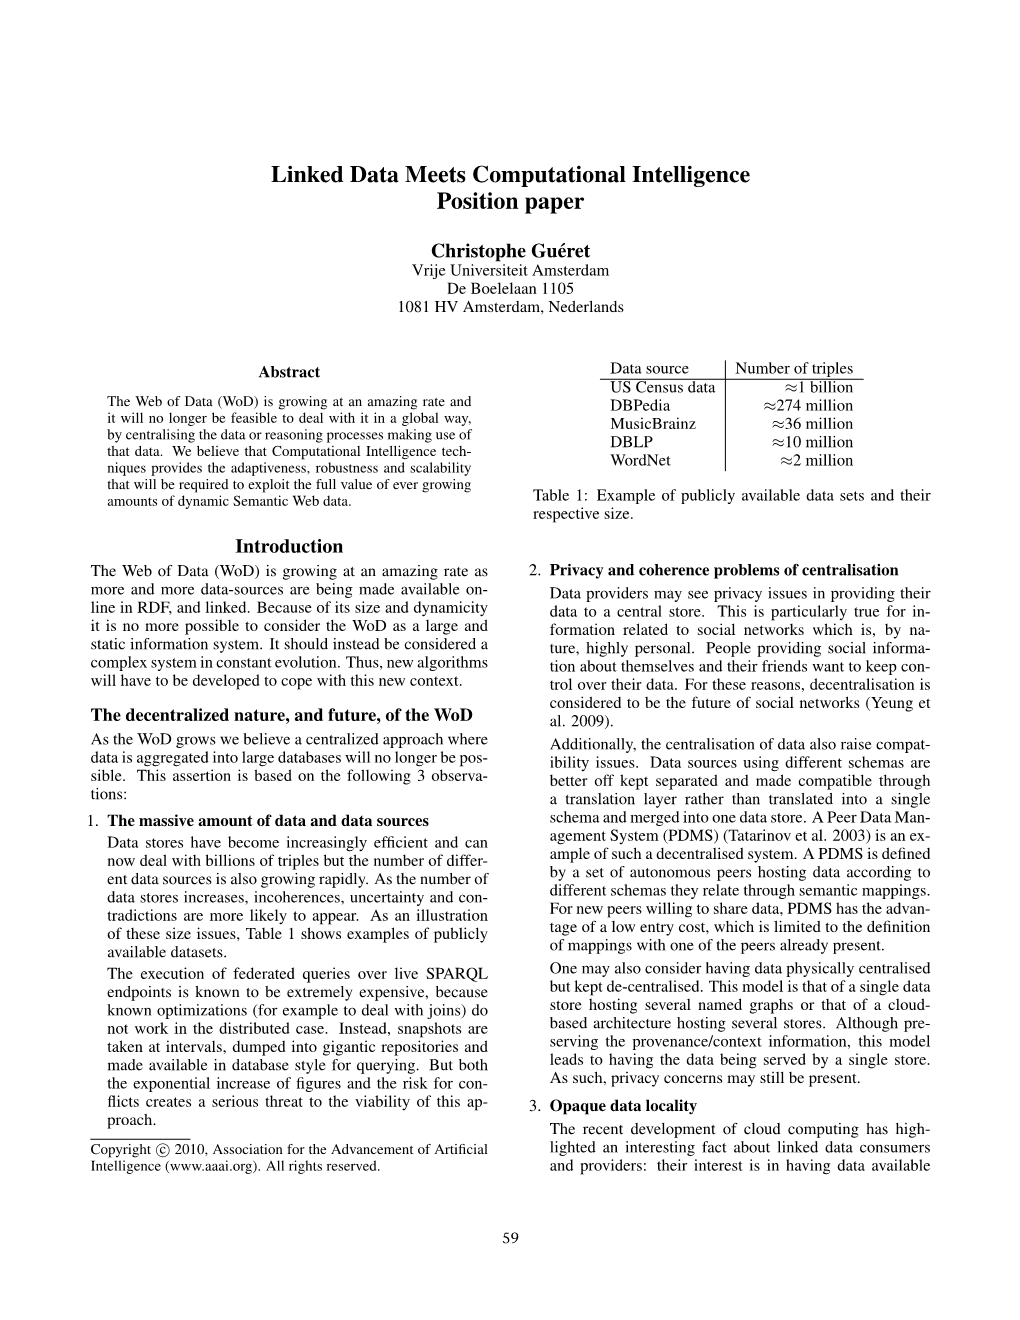 Linked Data Meets Computational Intelligence Position Paper